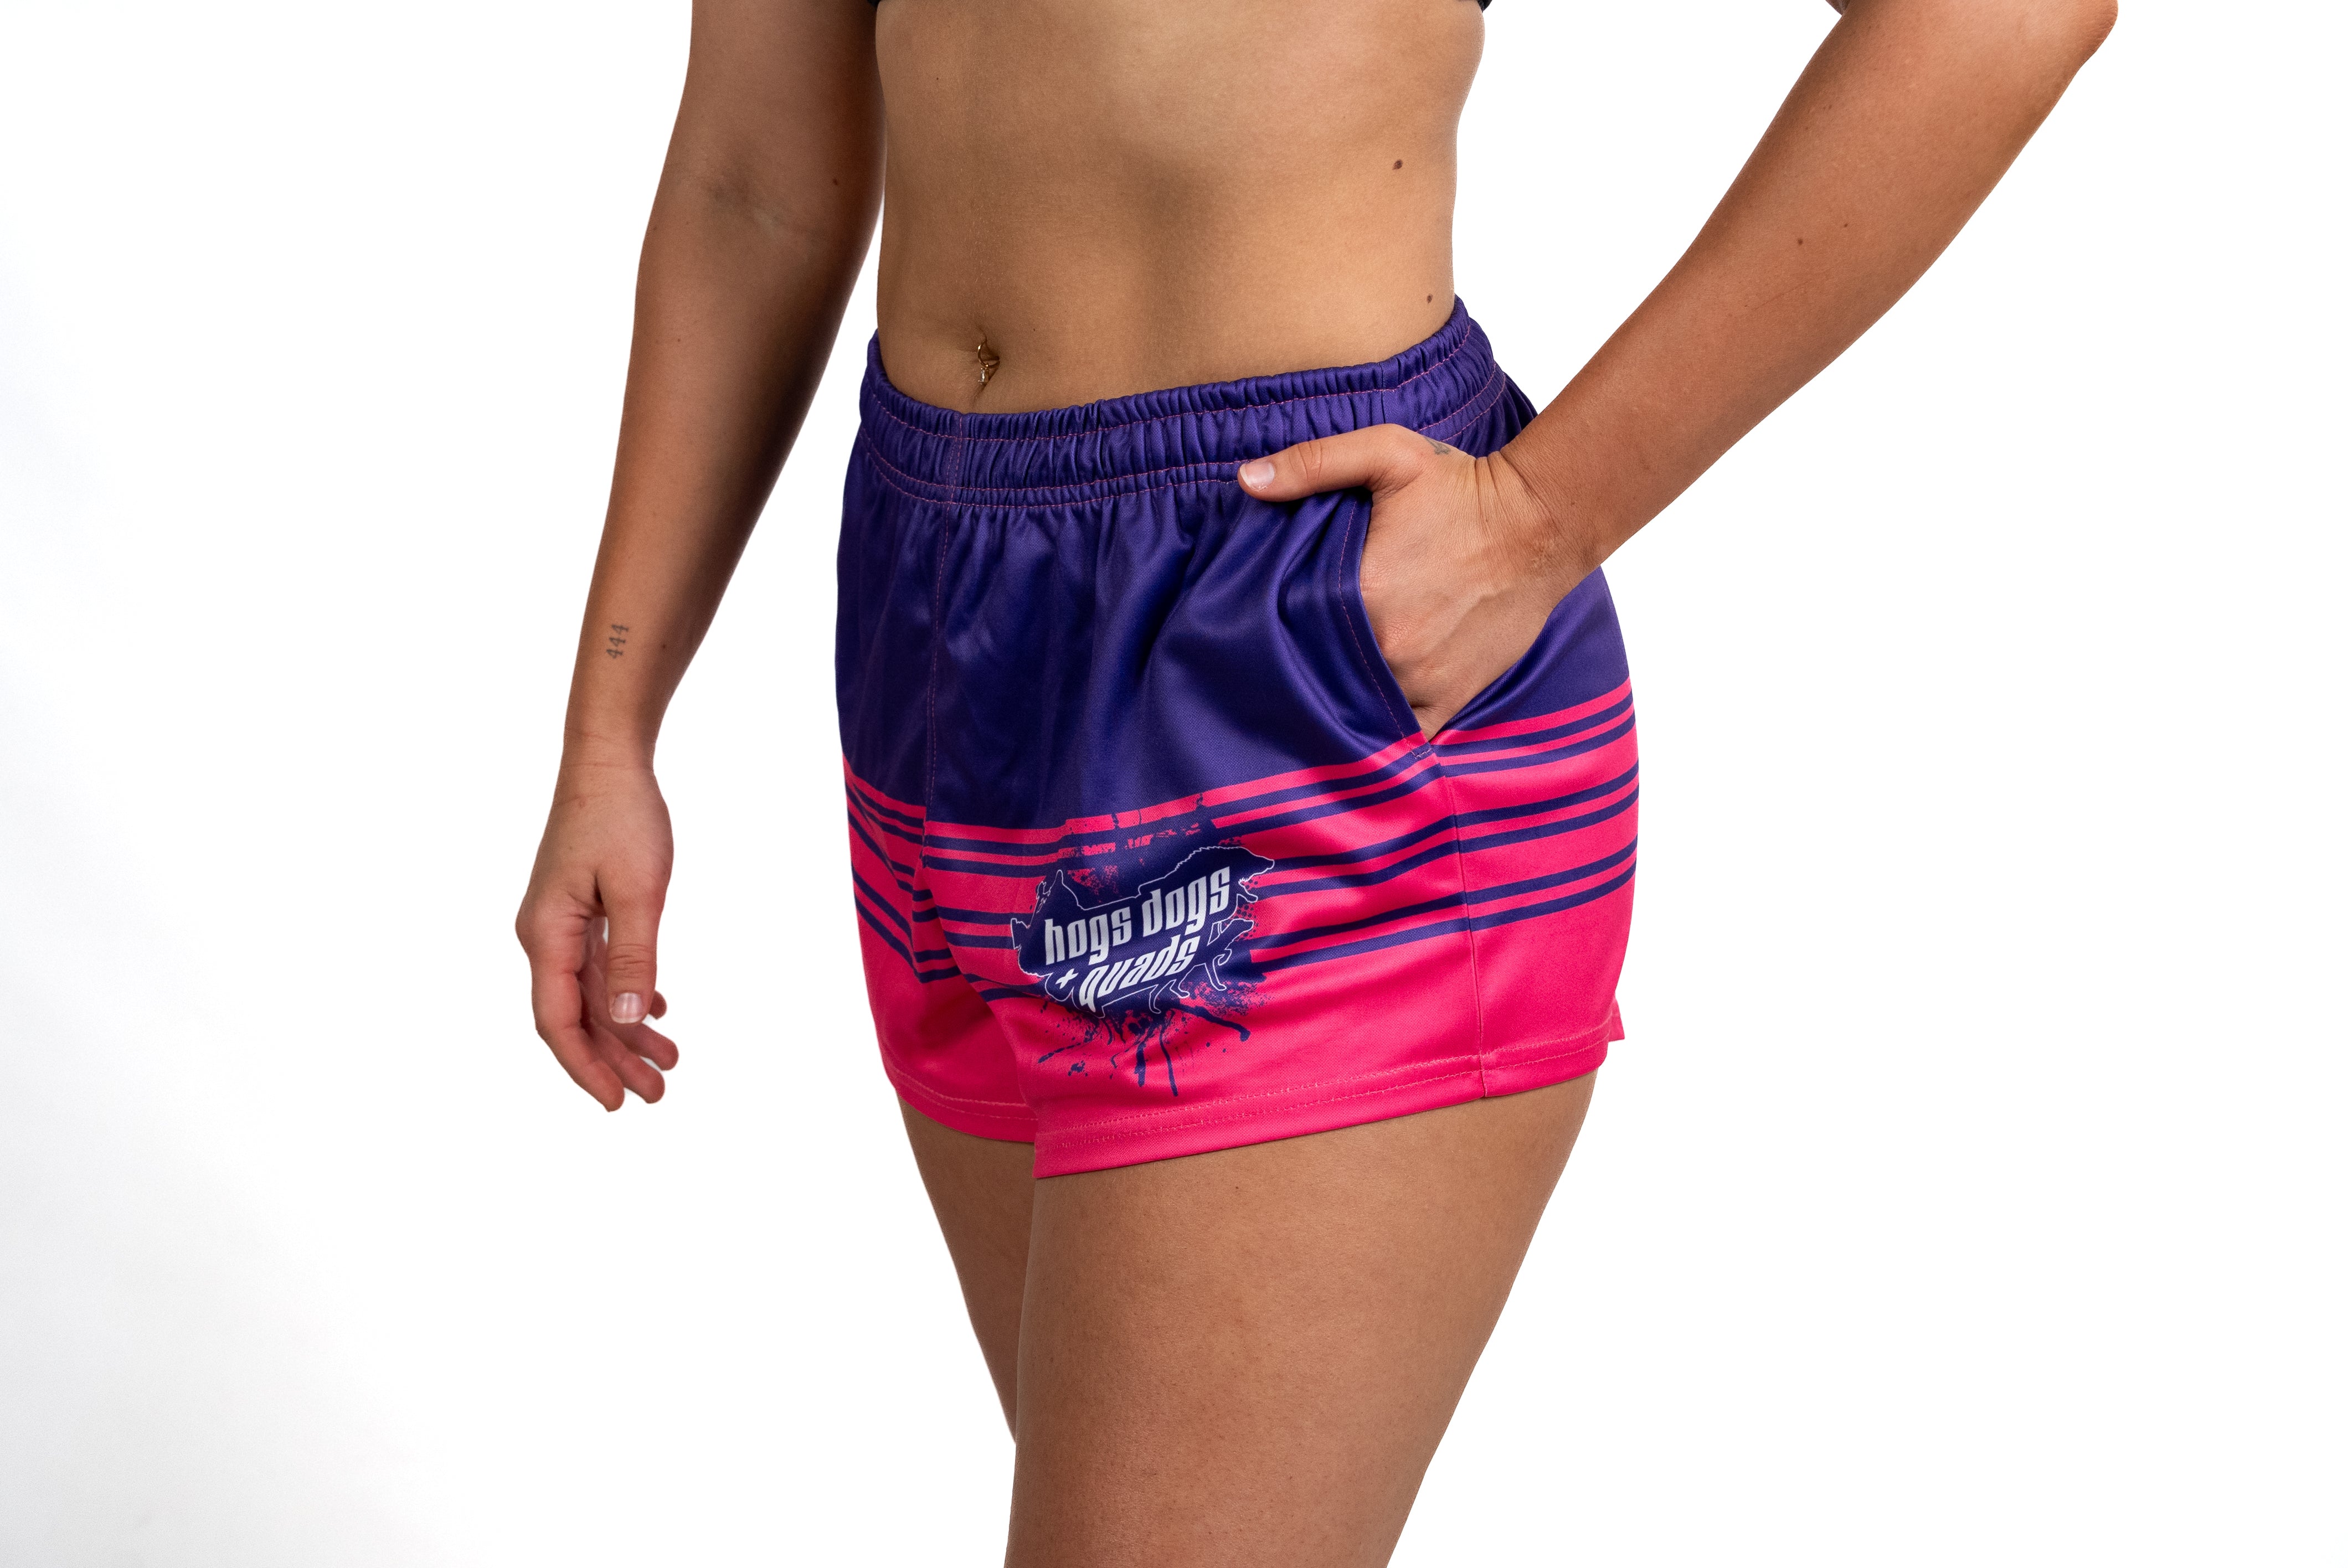 Footy Shorts - Pink & Purple - Hogs Dogs Quads Shop